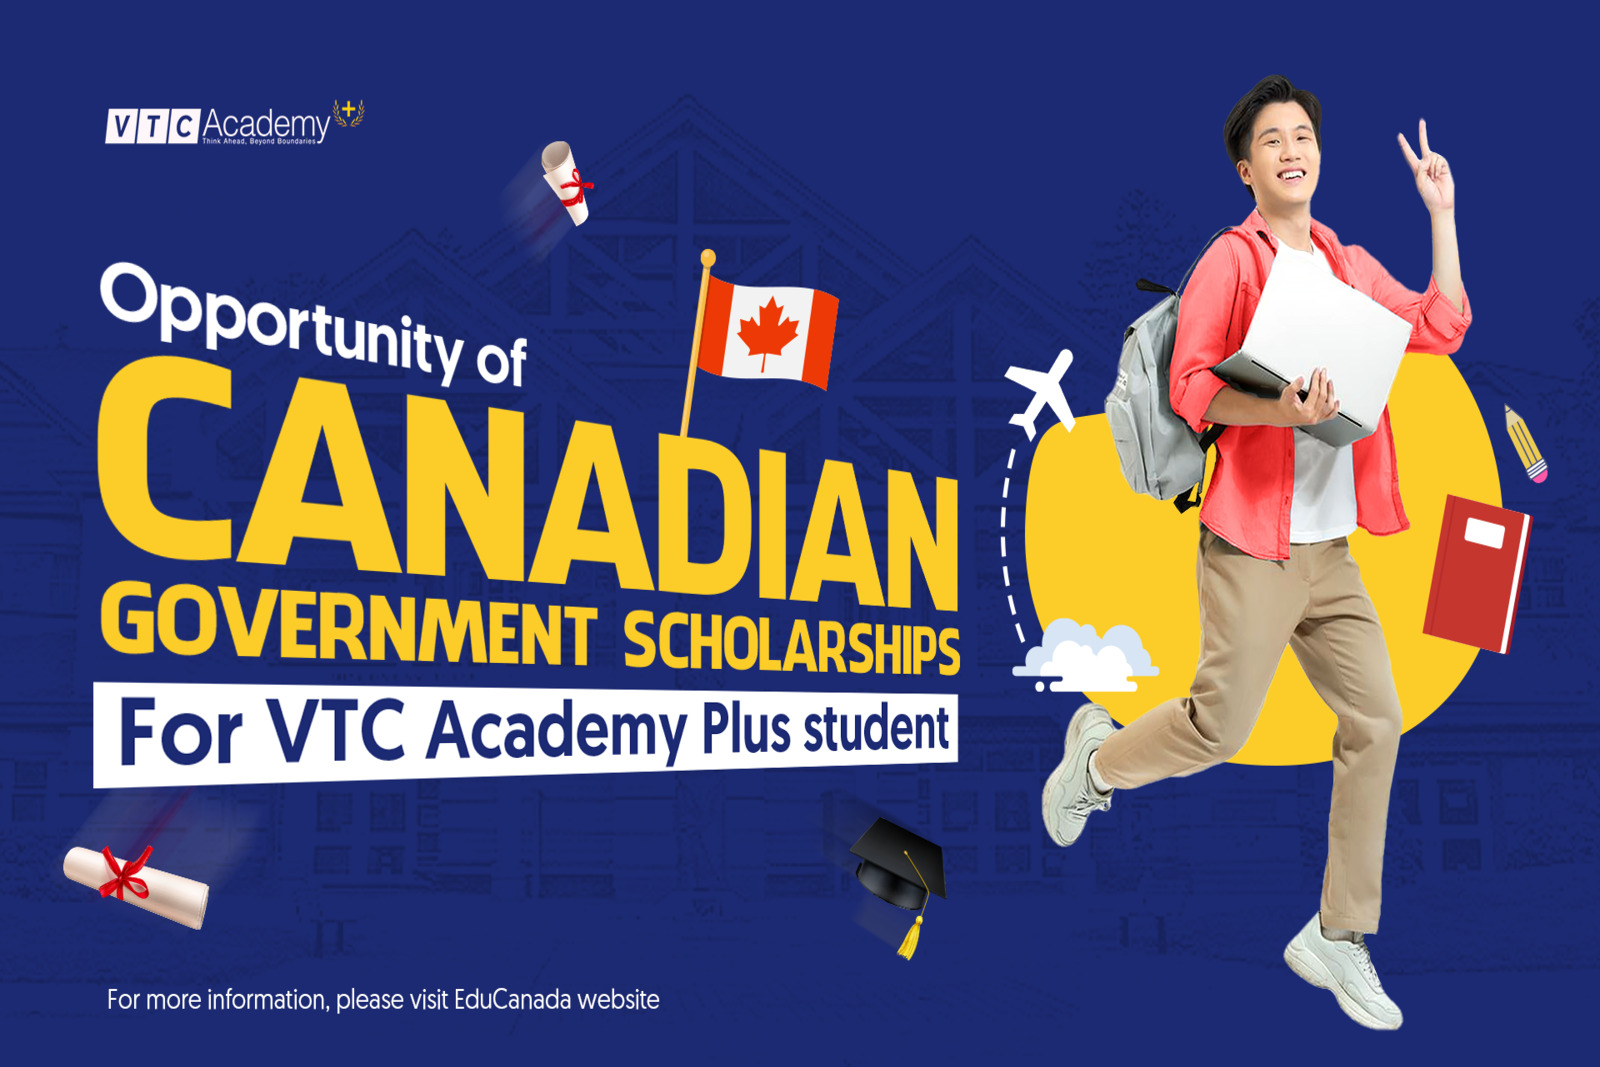 Canadian Government Scholarships – Opportunity for VTC Academy Plus students to study at NIC